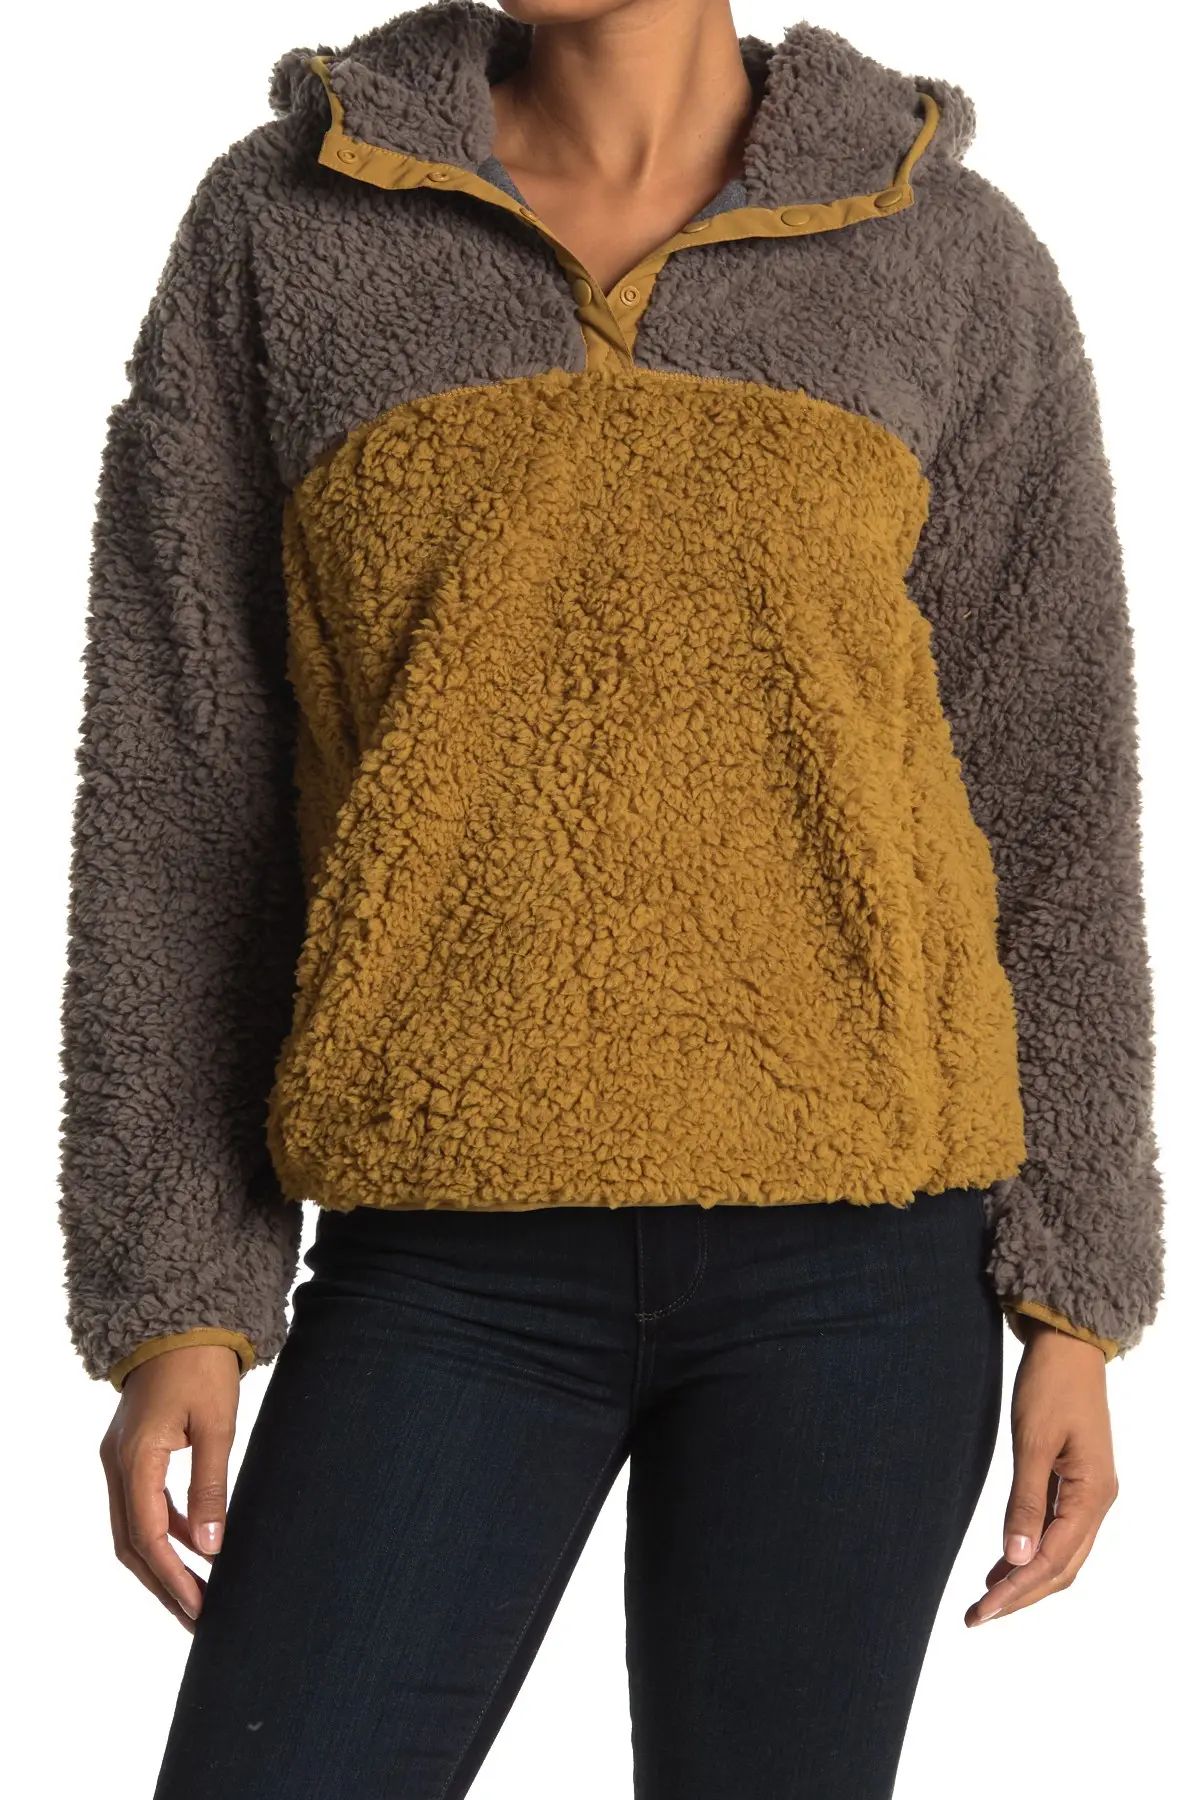 THREAD AND SUPPLY Malone Faux Shearling Colorblock Pullover Hoodie at Nordstrom Rack | Hautelook